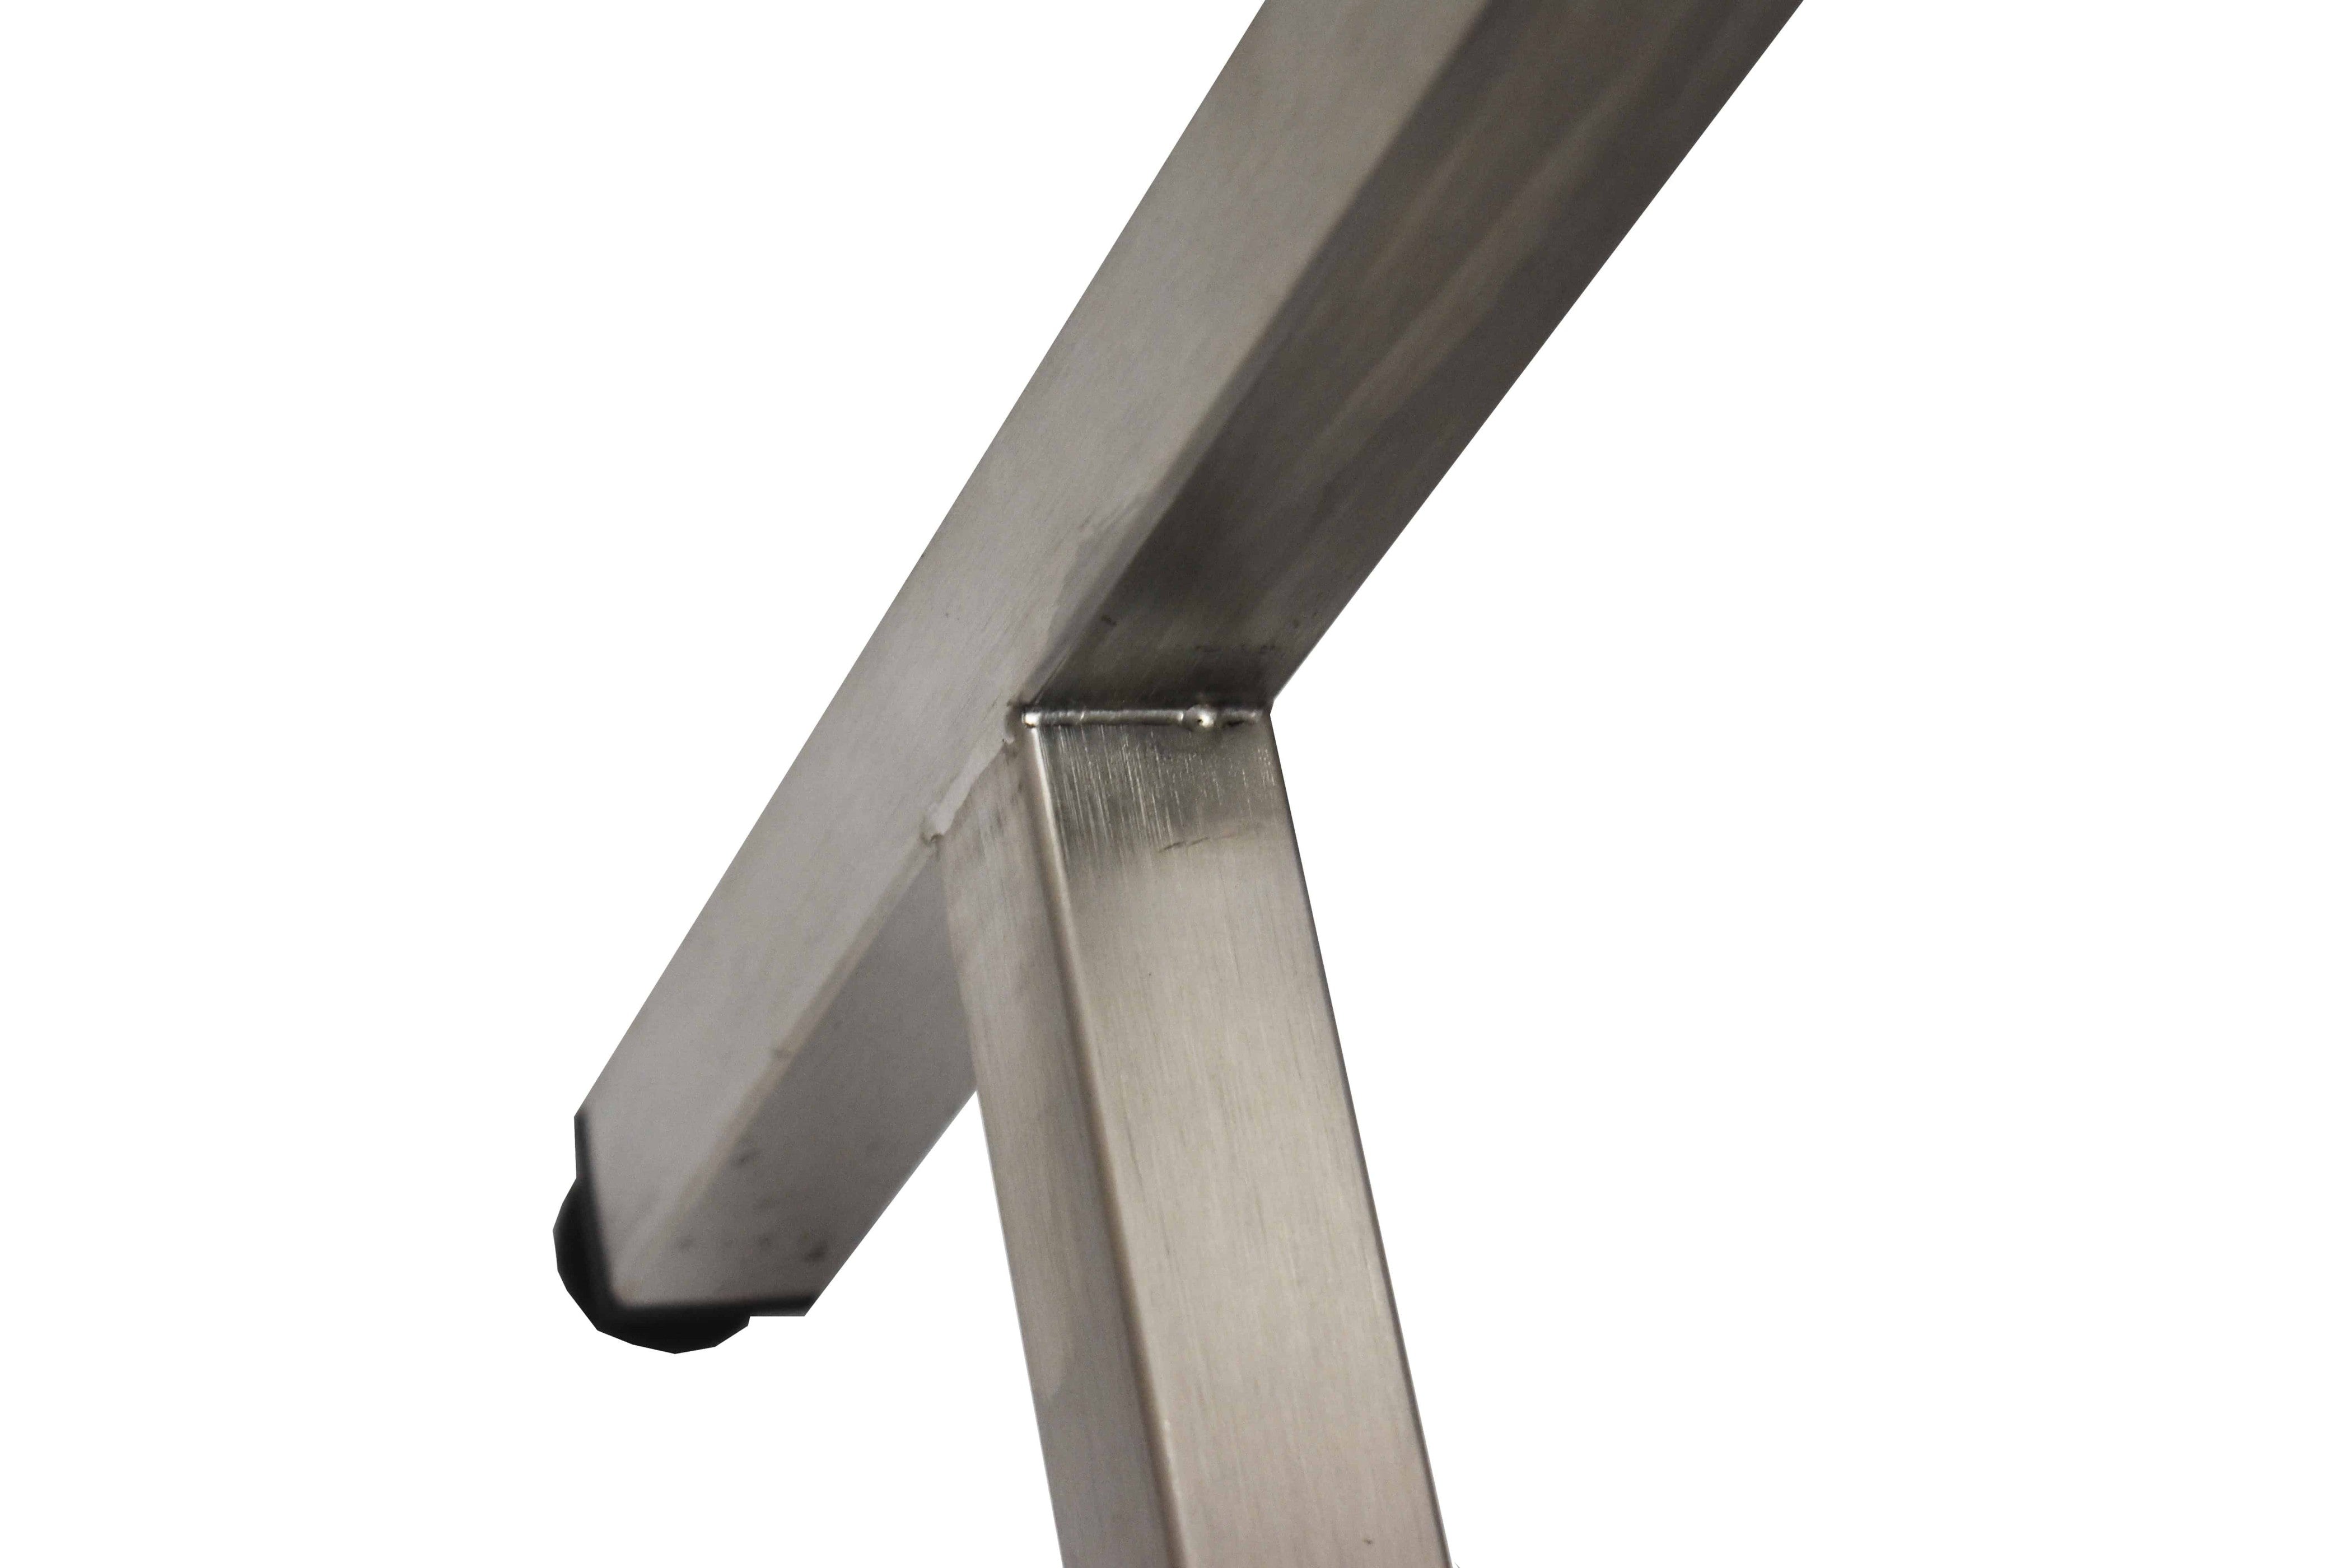 Stainless steel heavy duty table with rear tie bar